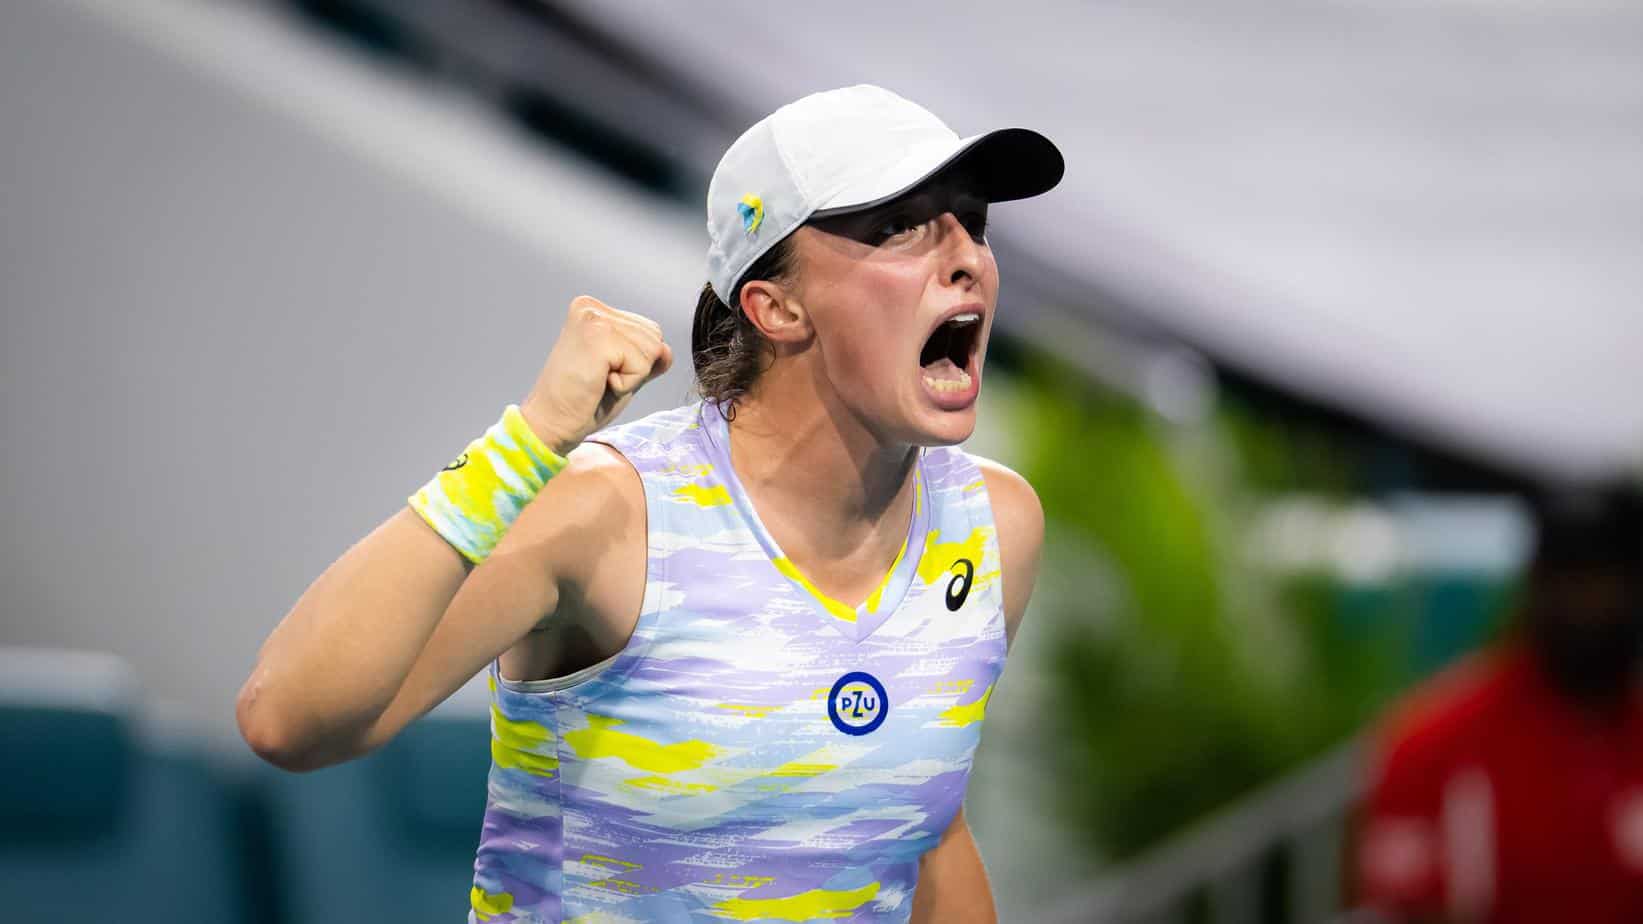 Miami Open: Women’s Finals – Betting Odds and Free Pick